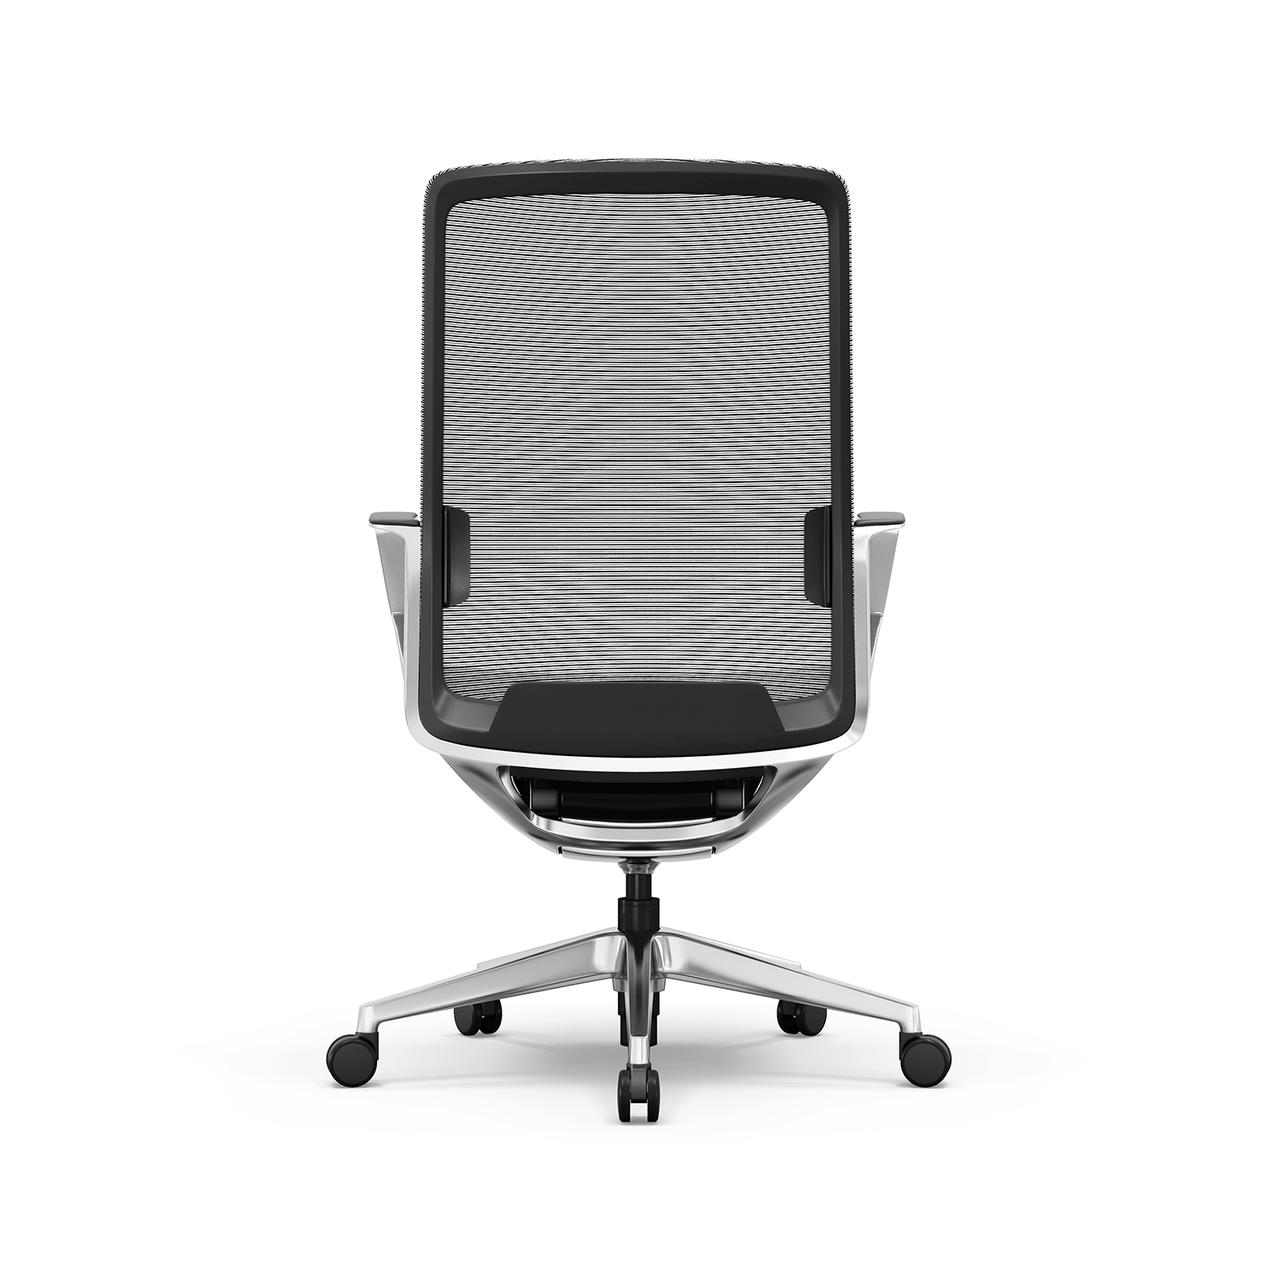  i5 Industries Gravity Executive Mesh Back Conference Chair 